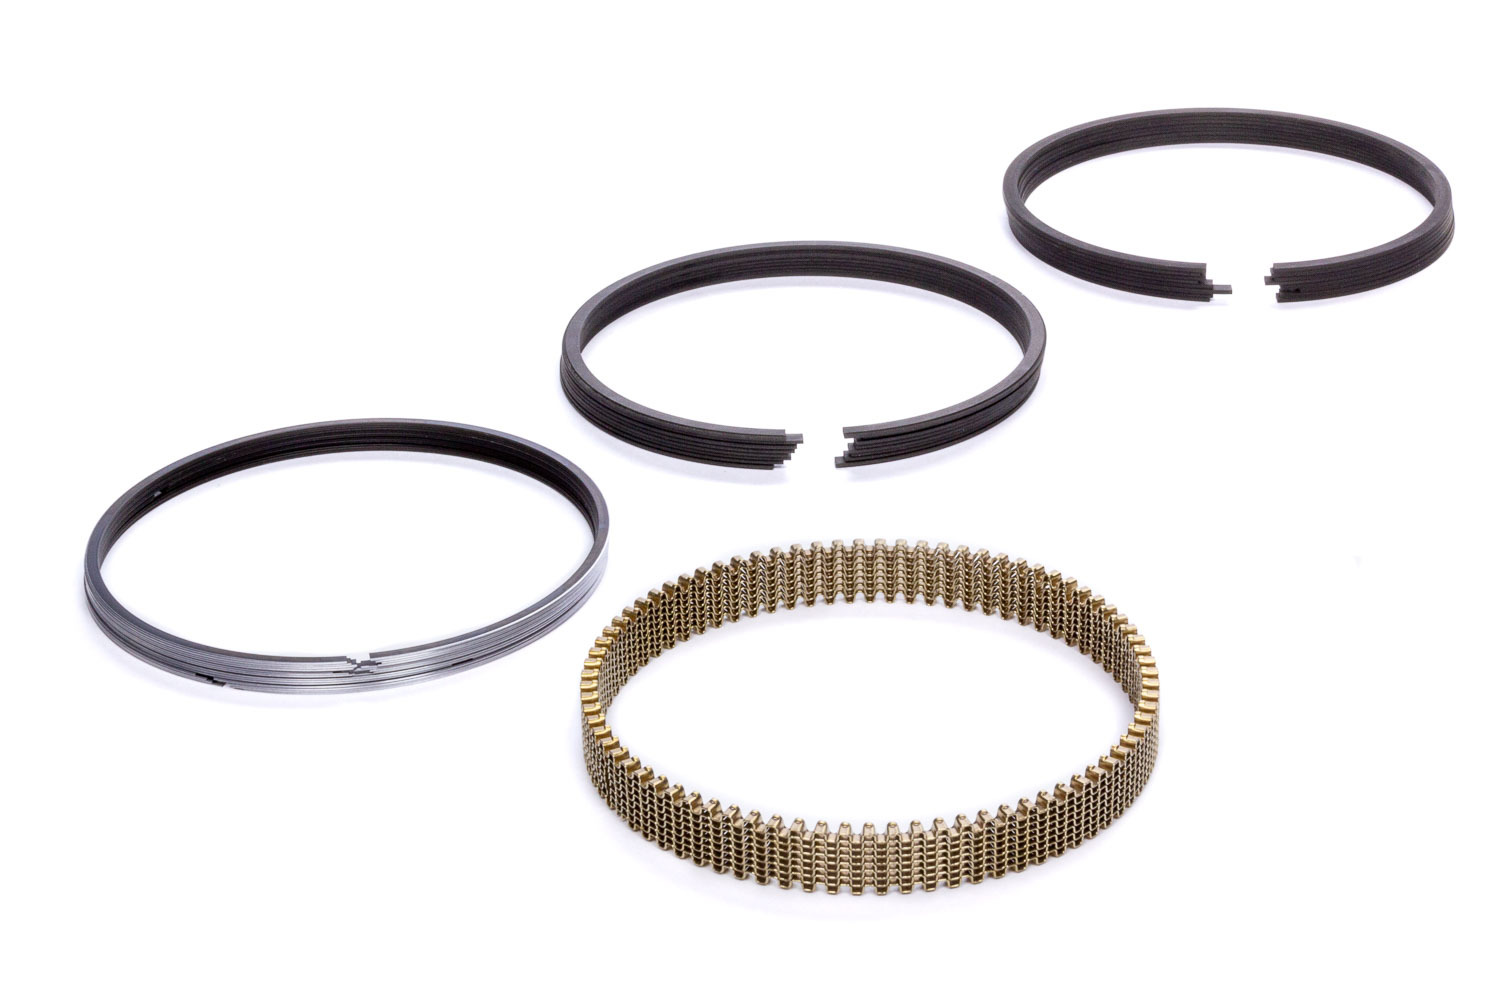 Hastings Piston Rings SN9050 Piston Rings, Premium Ductile and Steel Series, 4.125 in Bore, Drop In, 1.2 x 1.2 x 3.0 mm Thick, Standard Tension, Stainless Steel, Gas Nitride, 8-Cylinder, Kit